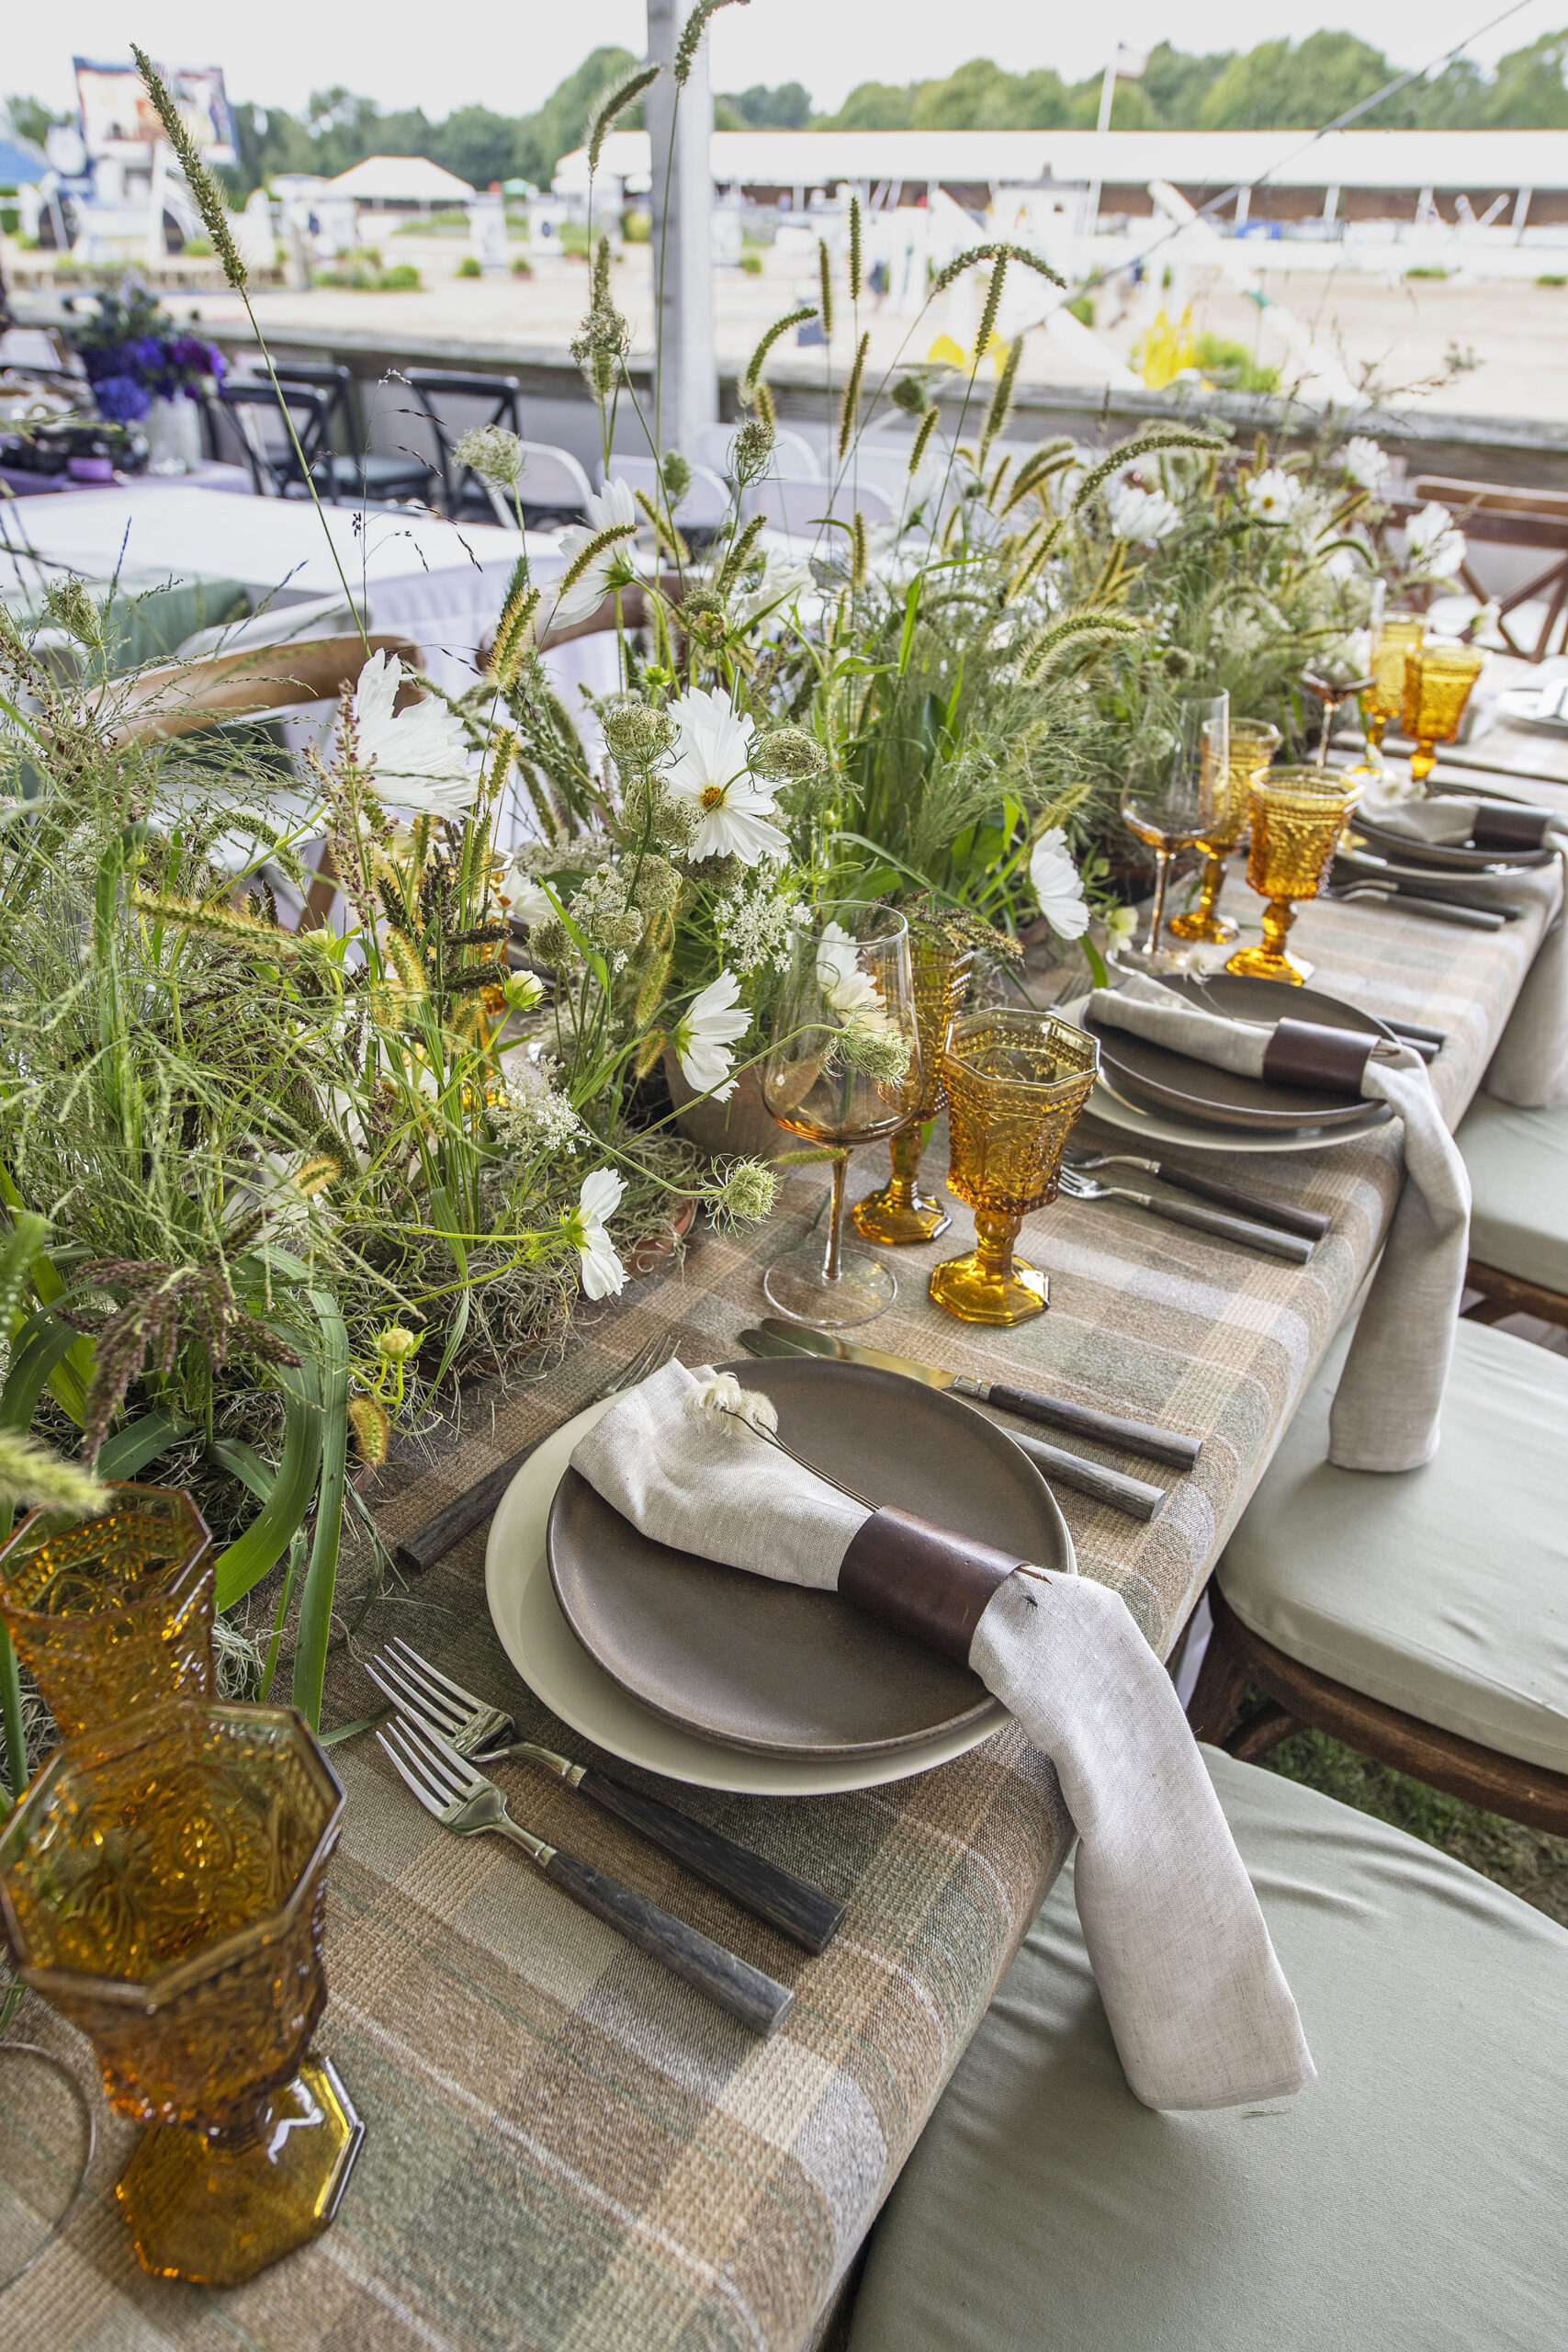 The table setting for the Mahoney table in the VIP tent at the 2021 Hampton Classic on Grand Prix Sunday, September 5th, 2021